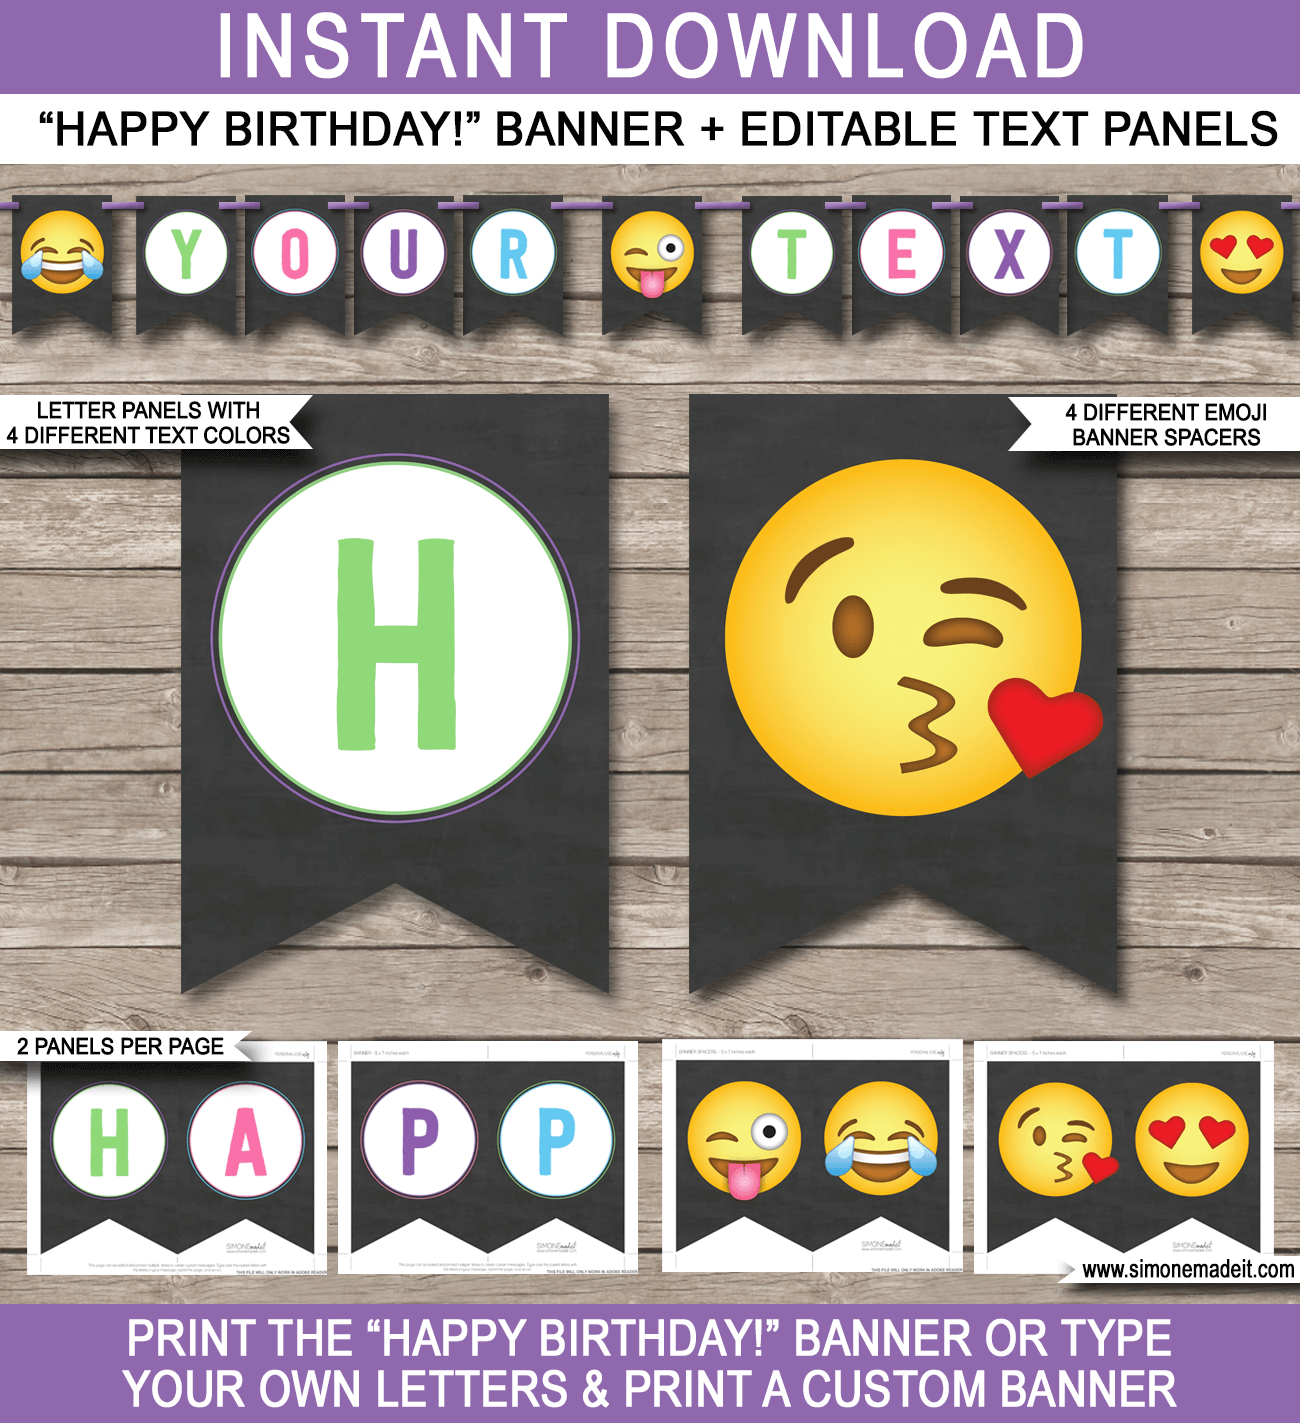 Emoji Party Pennant Banner Template - Emoji Theme Bunting - Happy Birthday Banner - Birthday Party - Editable and Printable DIY Template - INSTANT DOWNLOAD via simonemadeit.com